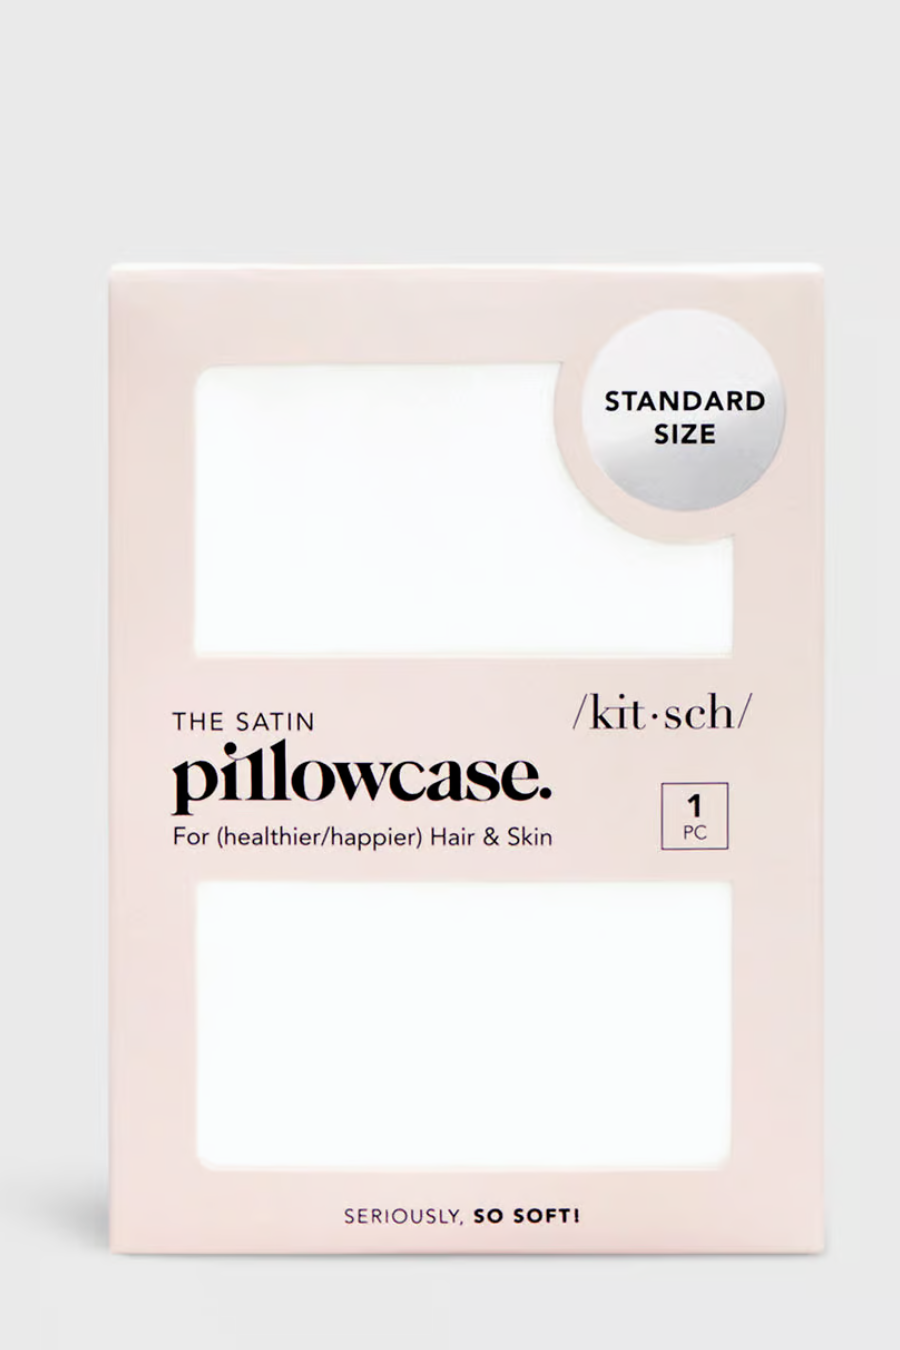 satin pillowcase in its packaging 